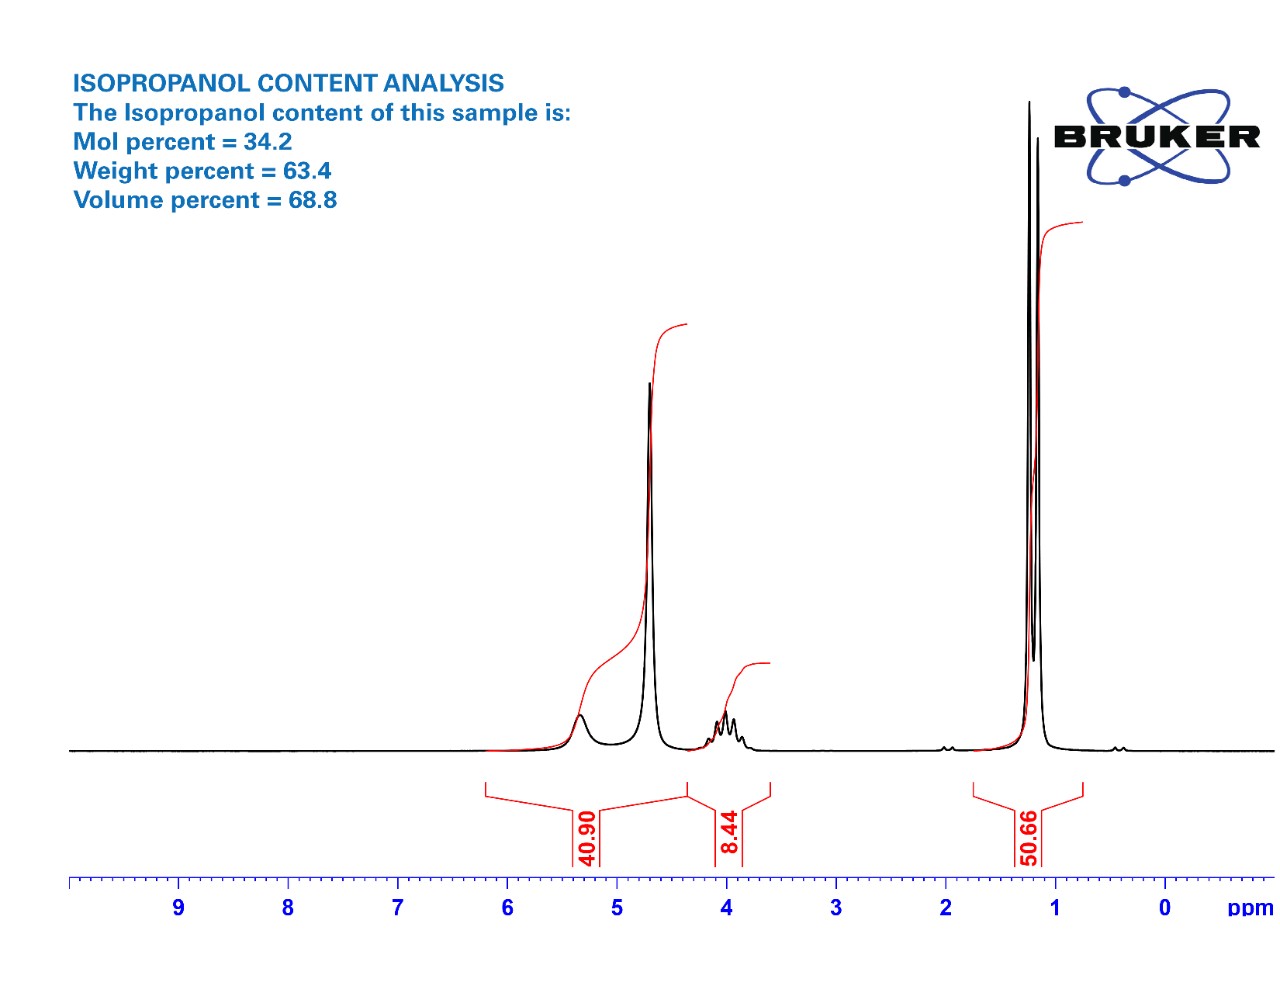 Figure 2: NMR sample report showing isopropanol content of a hand sanitizer.